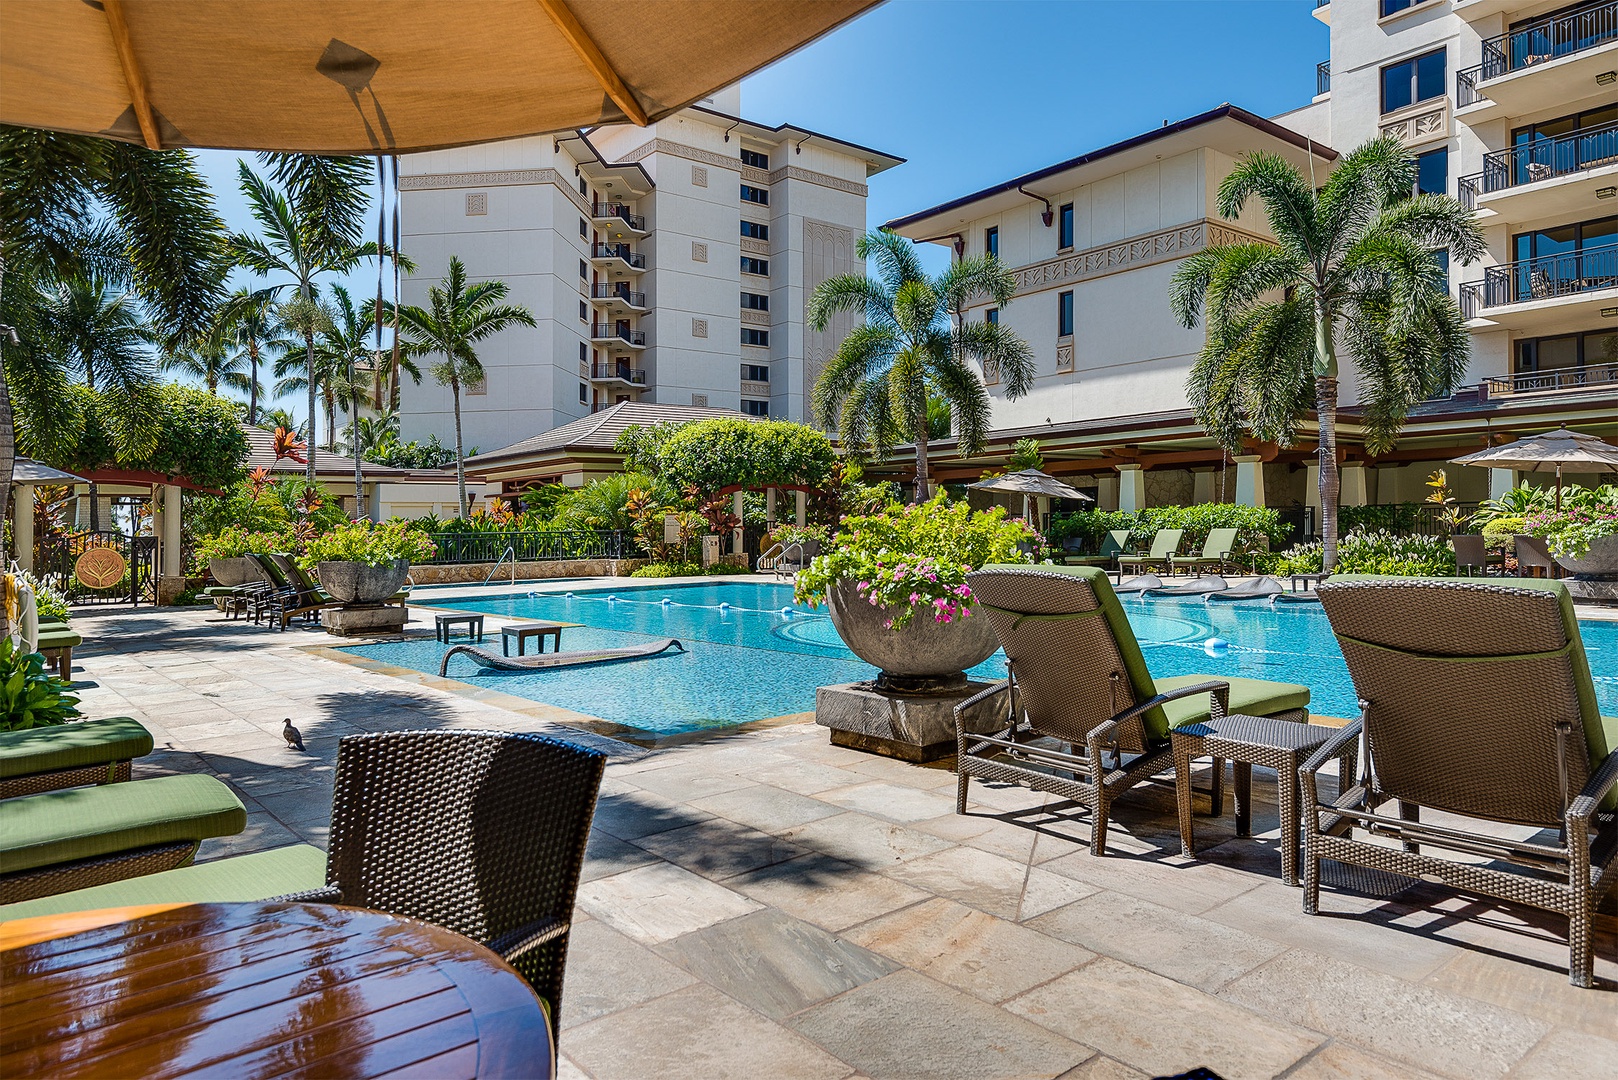 Kapolei Vacation Rentals, Ko Olina Beach Villas O224 - Read your favorite book in the lounge chairs next to the pool.